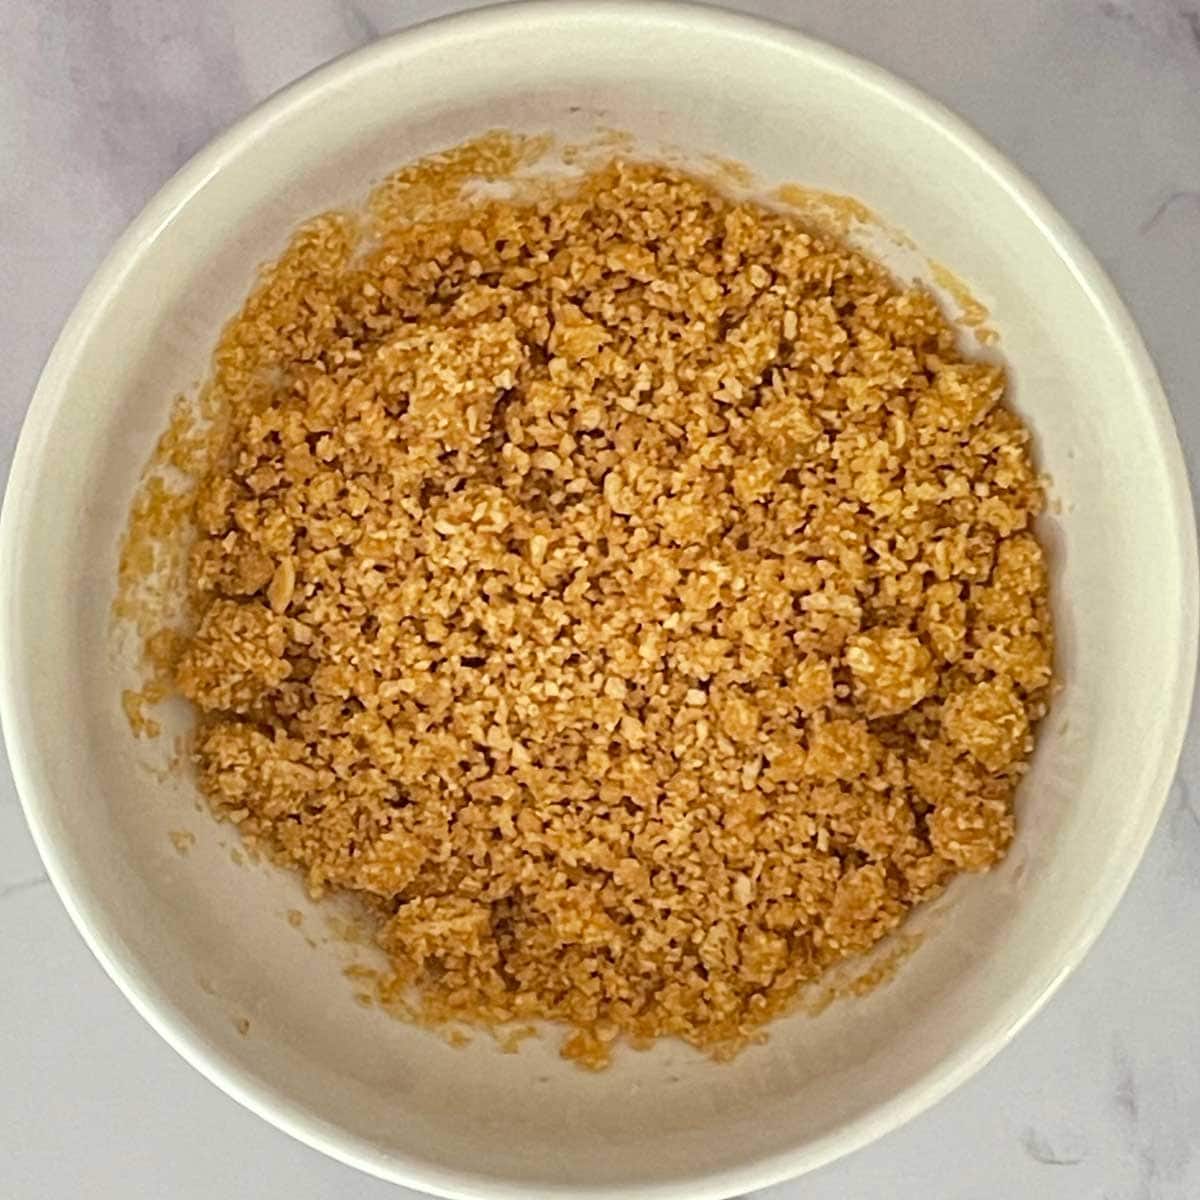 Crushed Graham's cracker in a bowl.